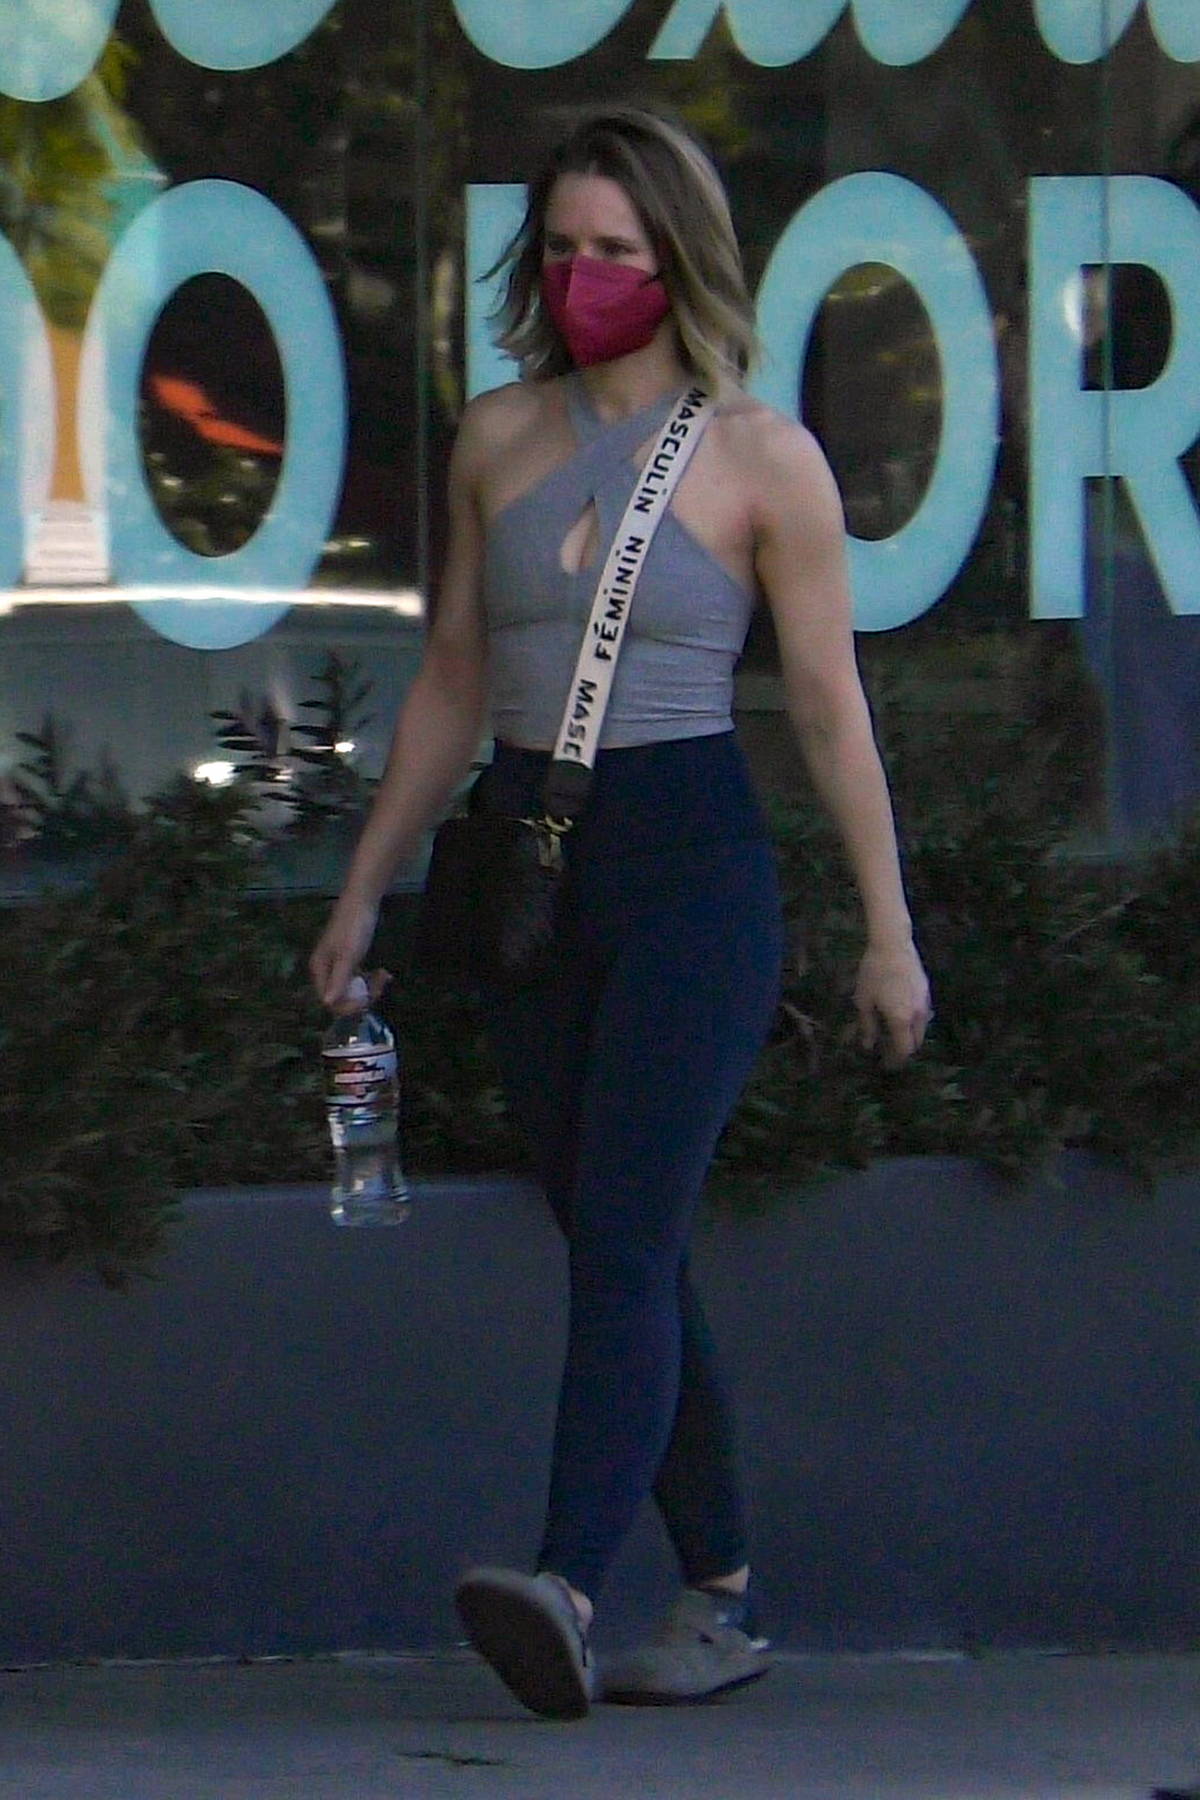 Kristen Bell looks athletic in a crop top and leggings as she hits